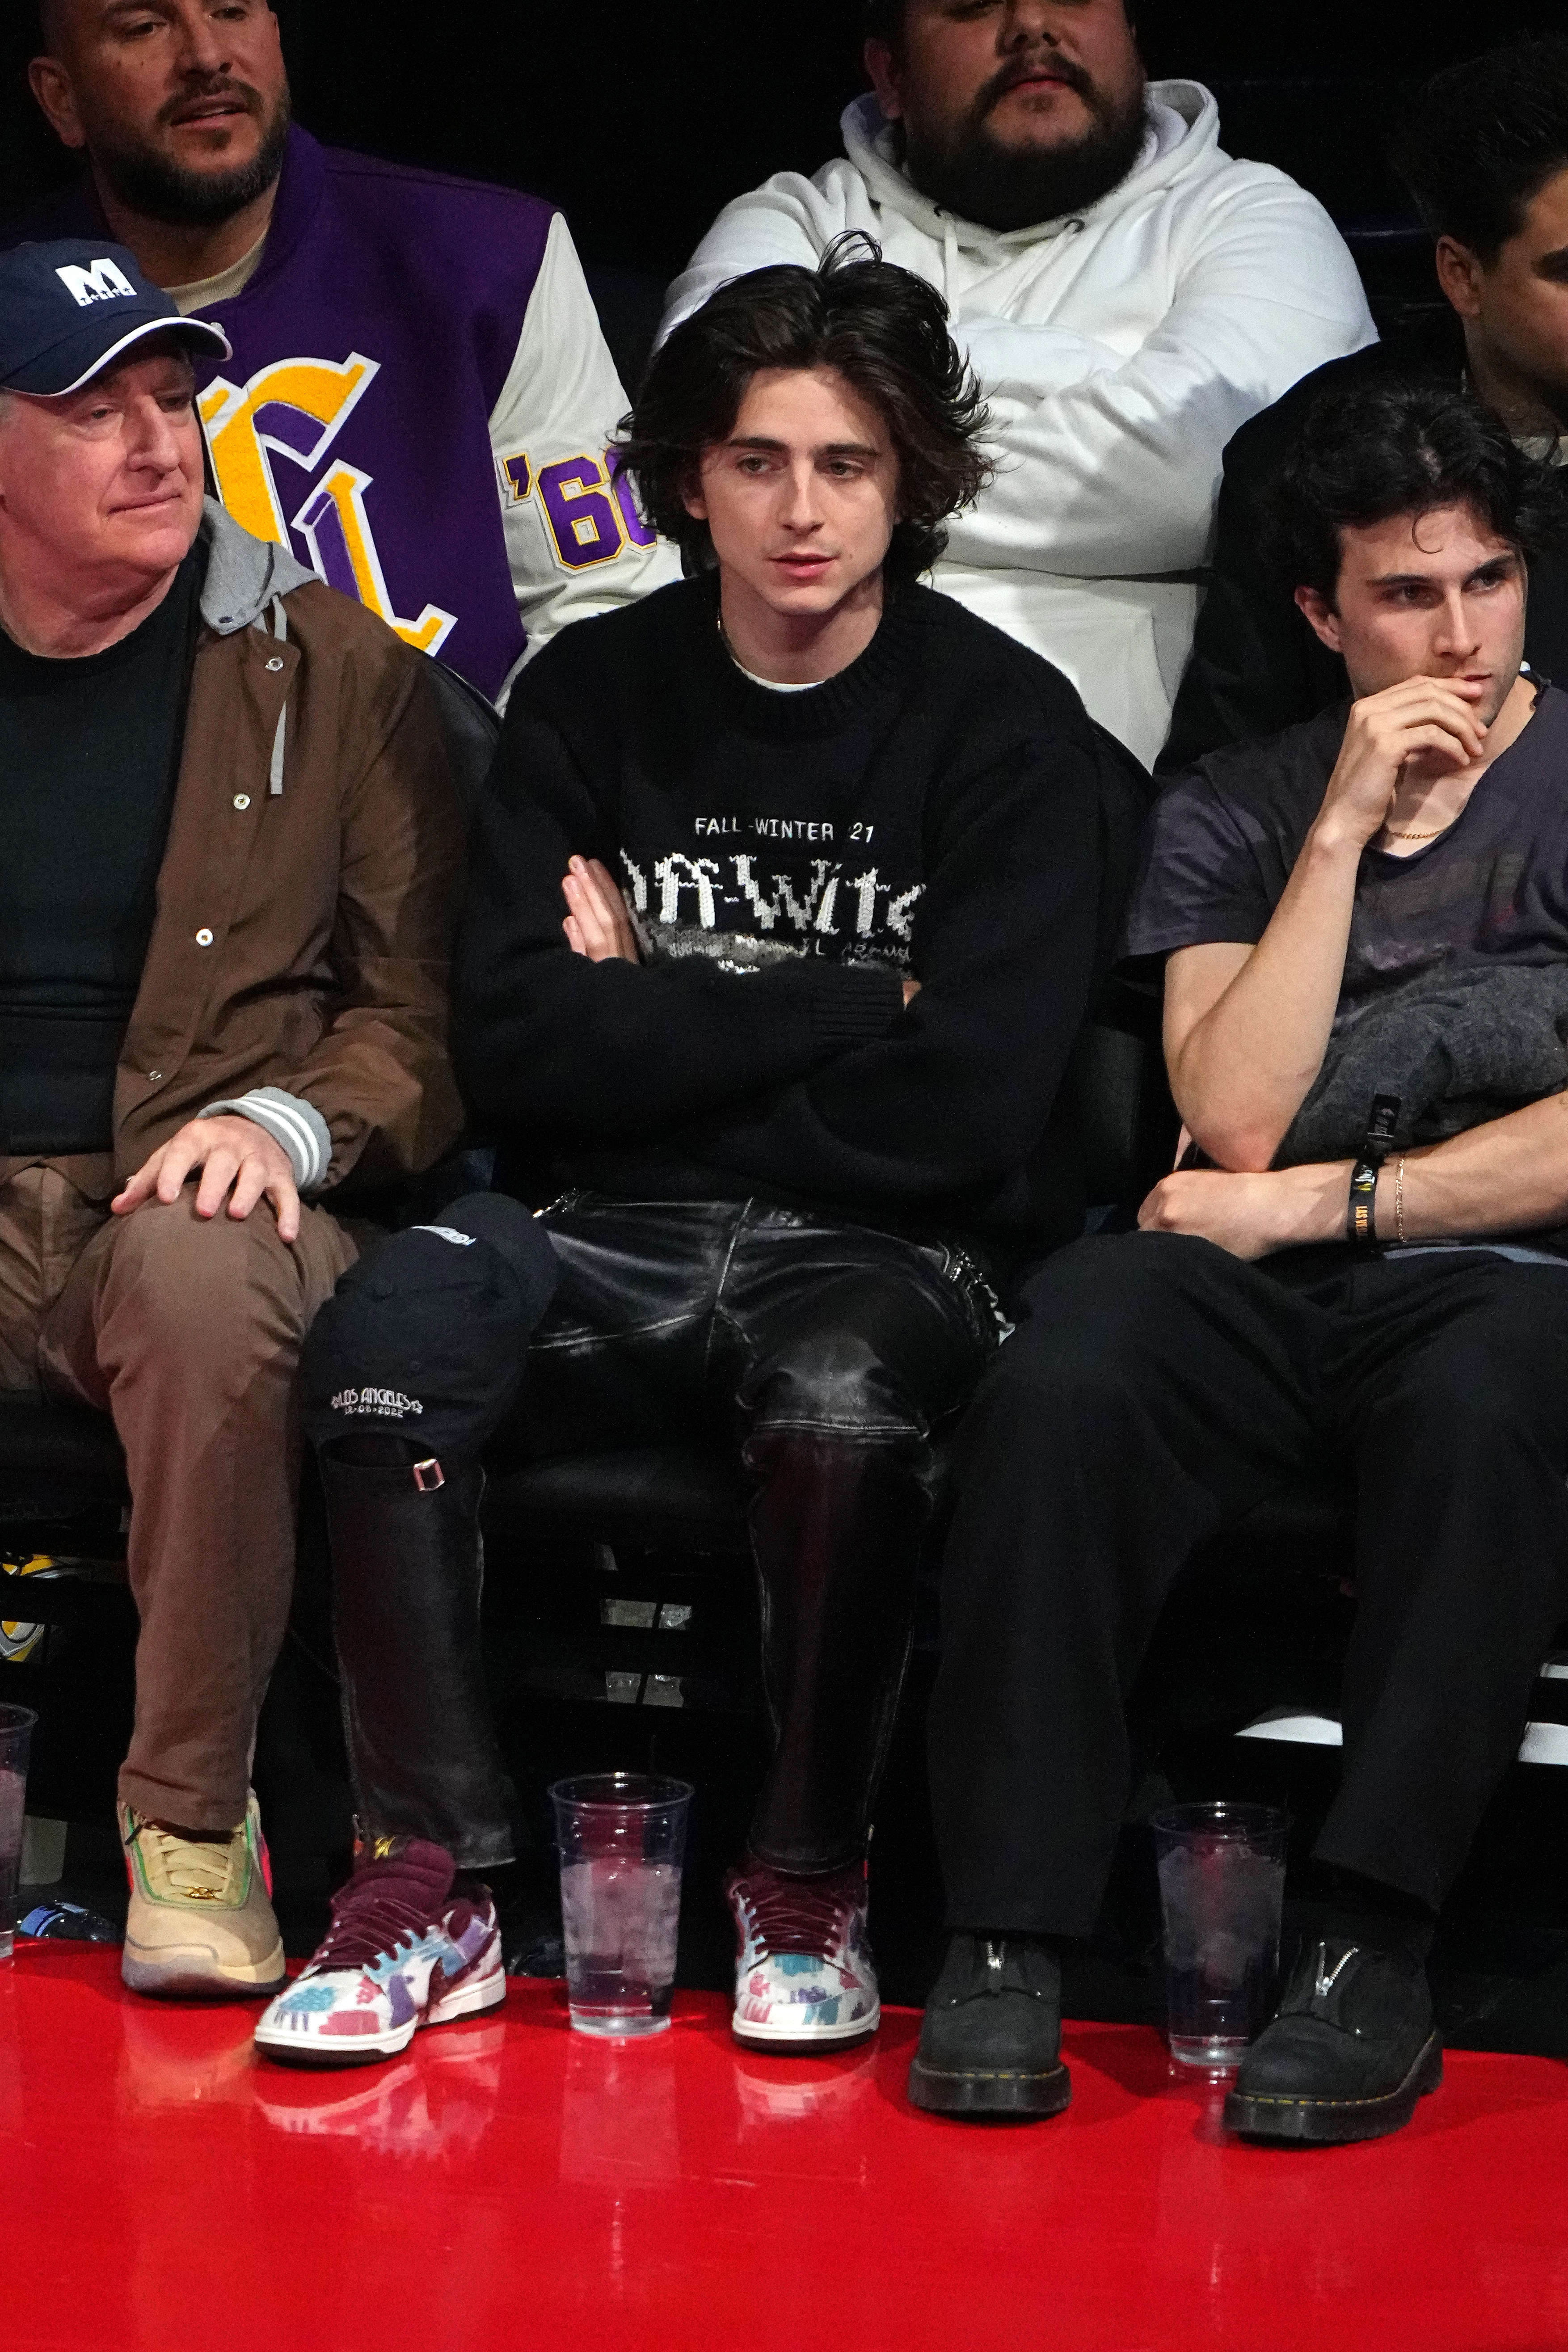 Timothée looked solemn throughout many moments of the basketball game